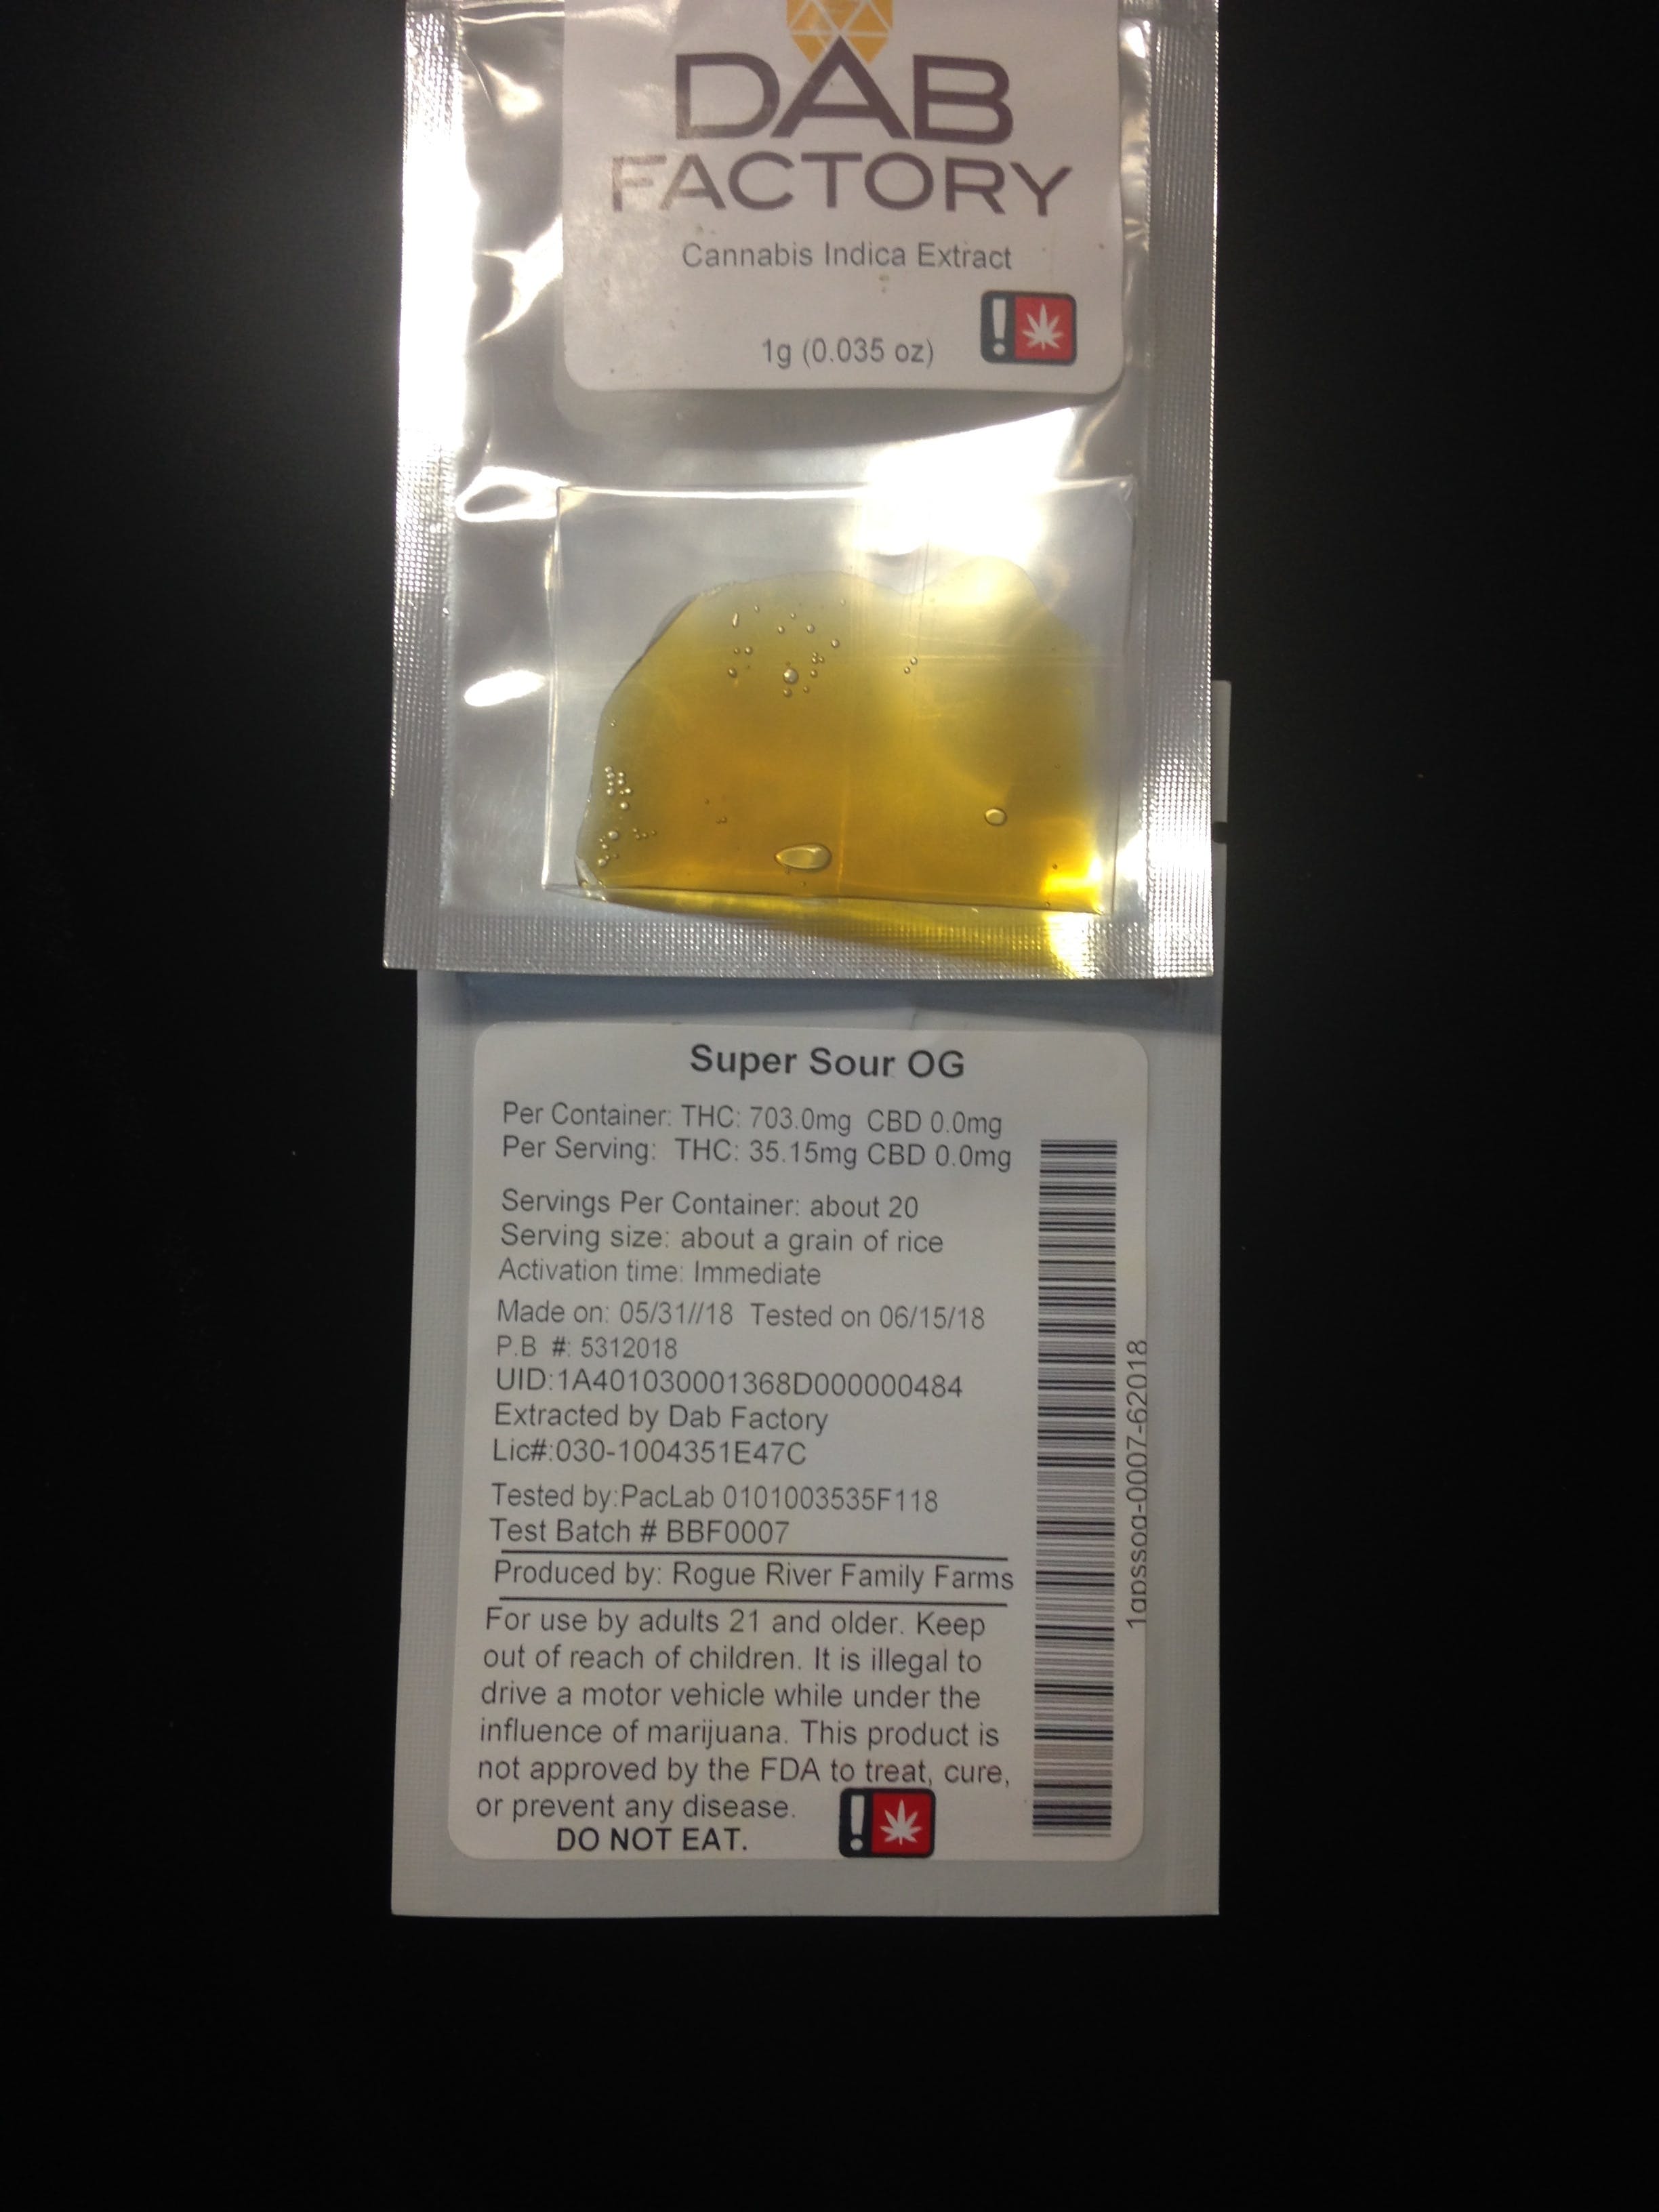 wax-dab-factory-extracts-ssog-1g